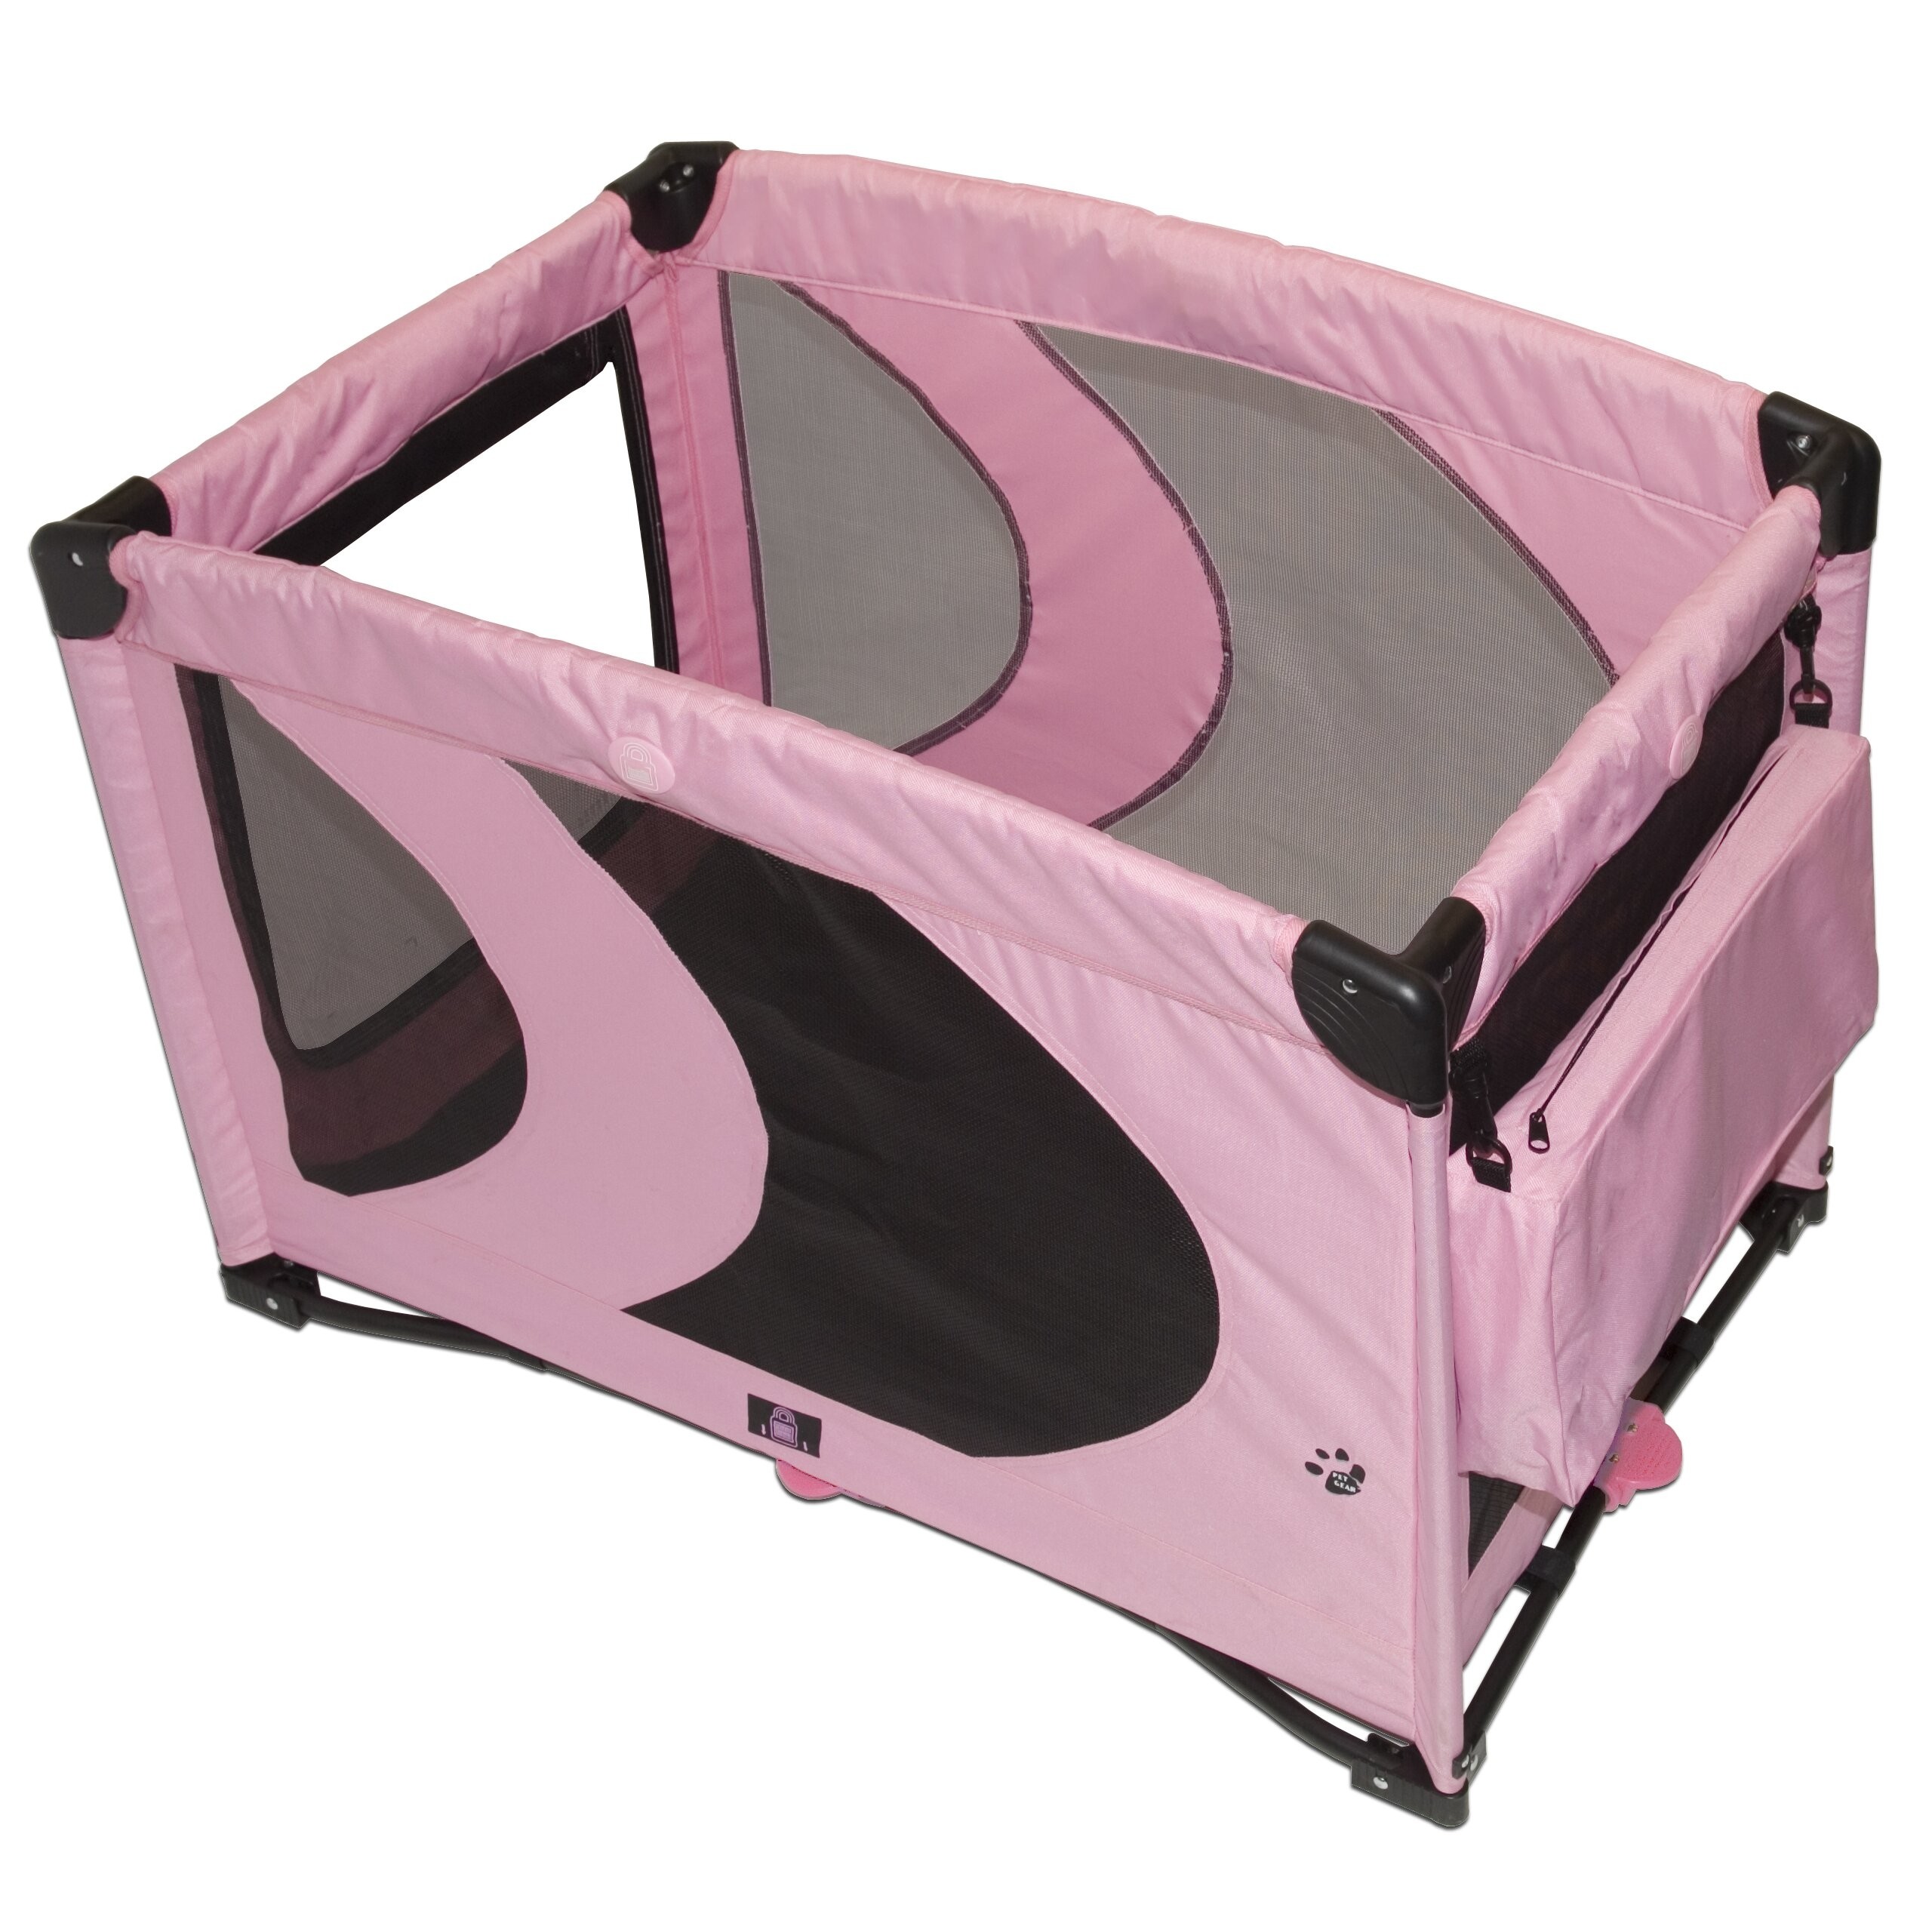 Cat pen in pink is ideal for confining kittens and